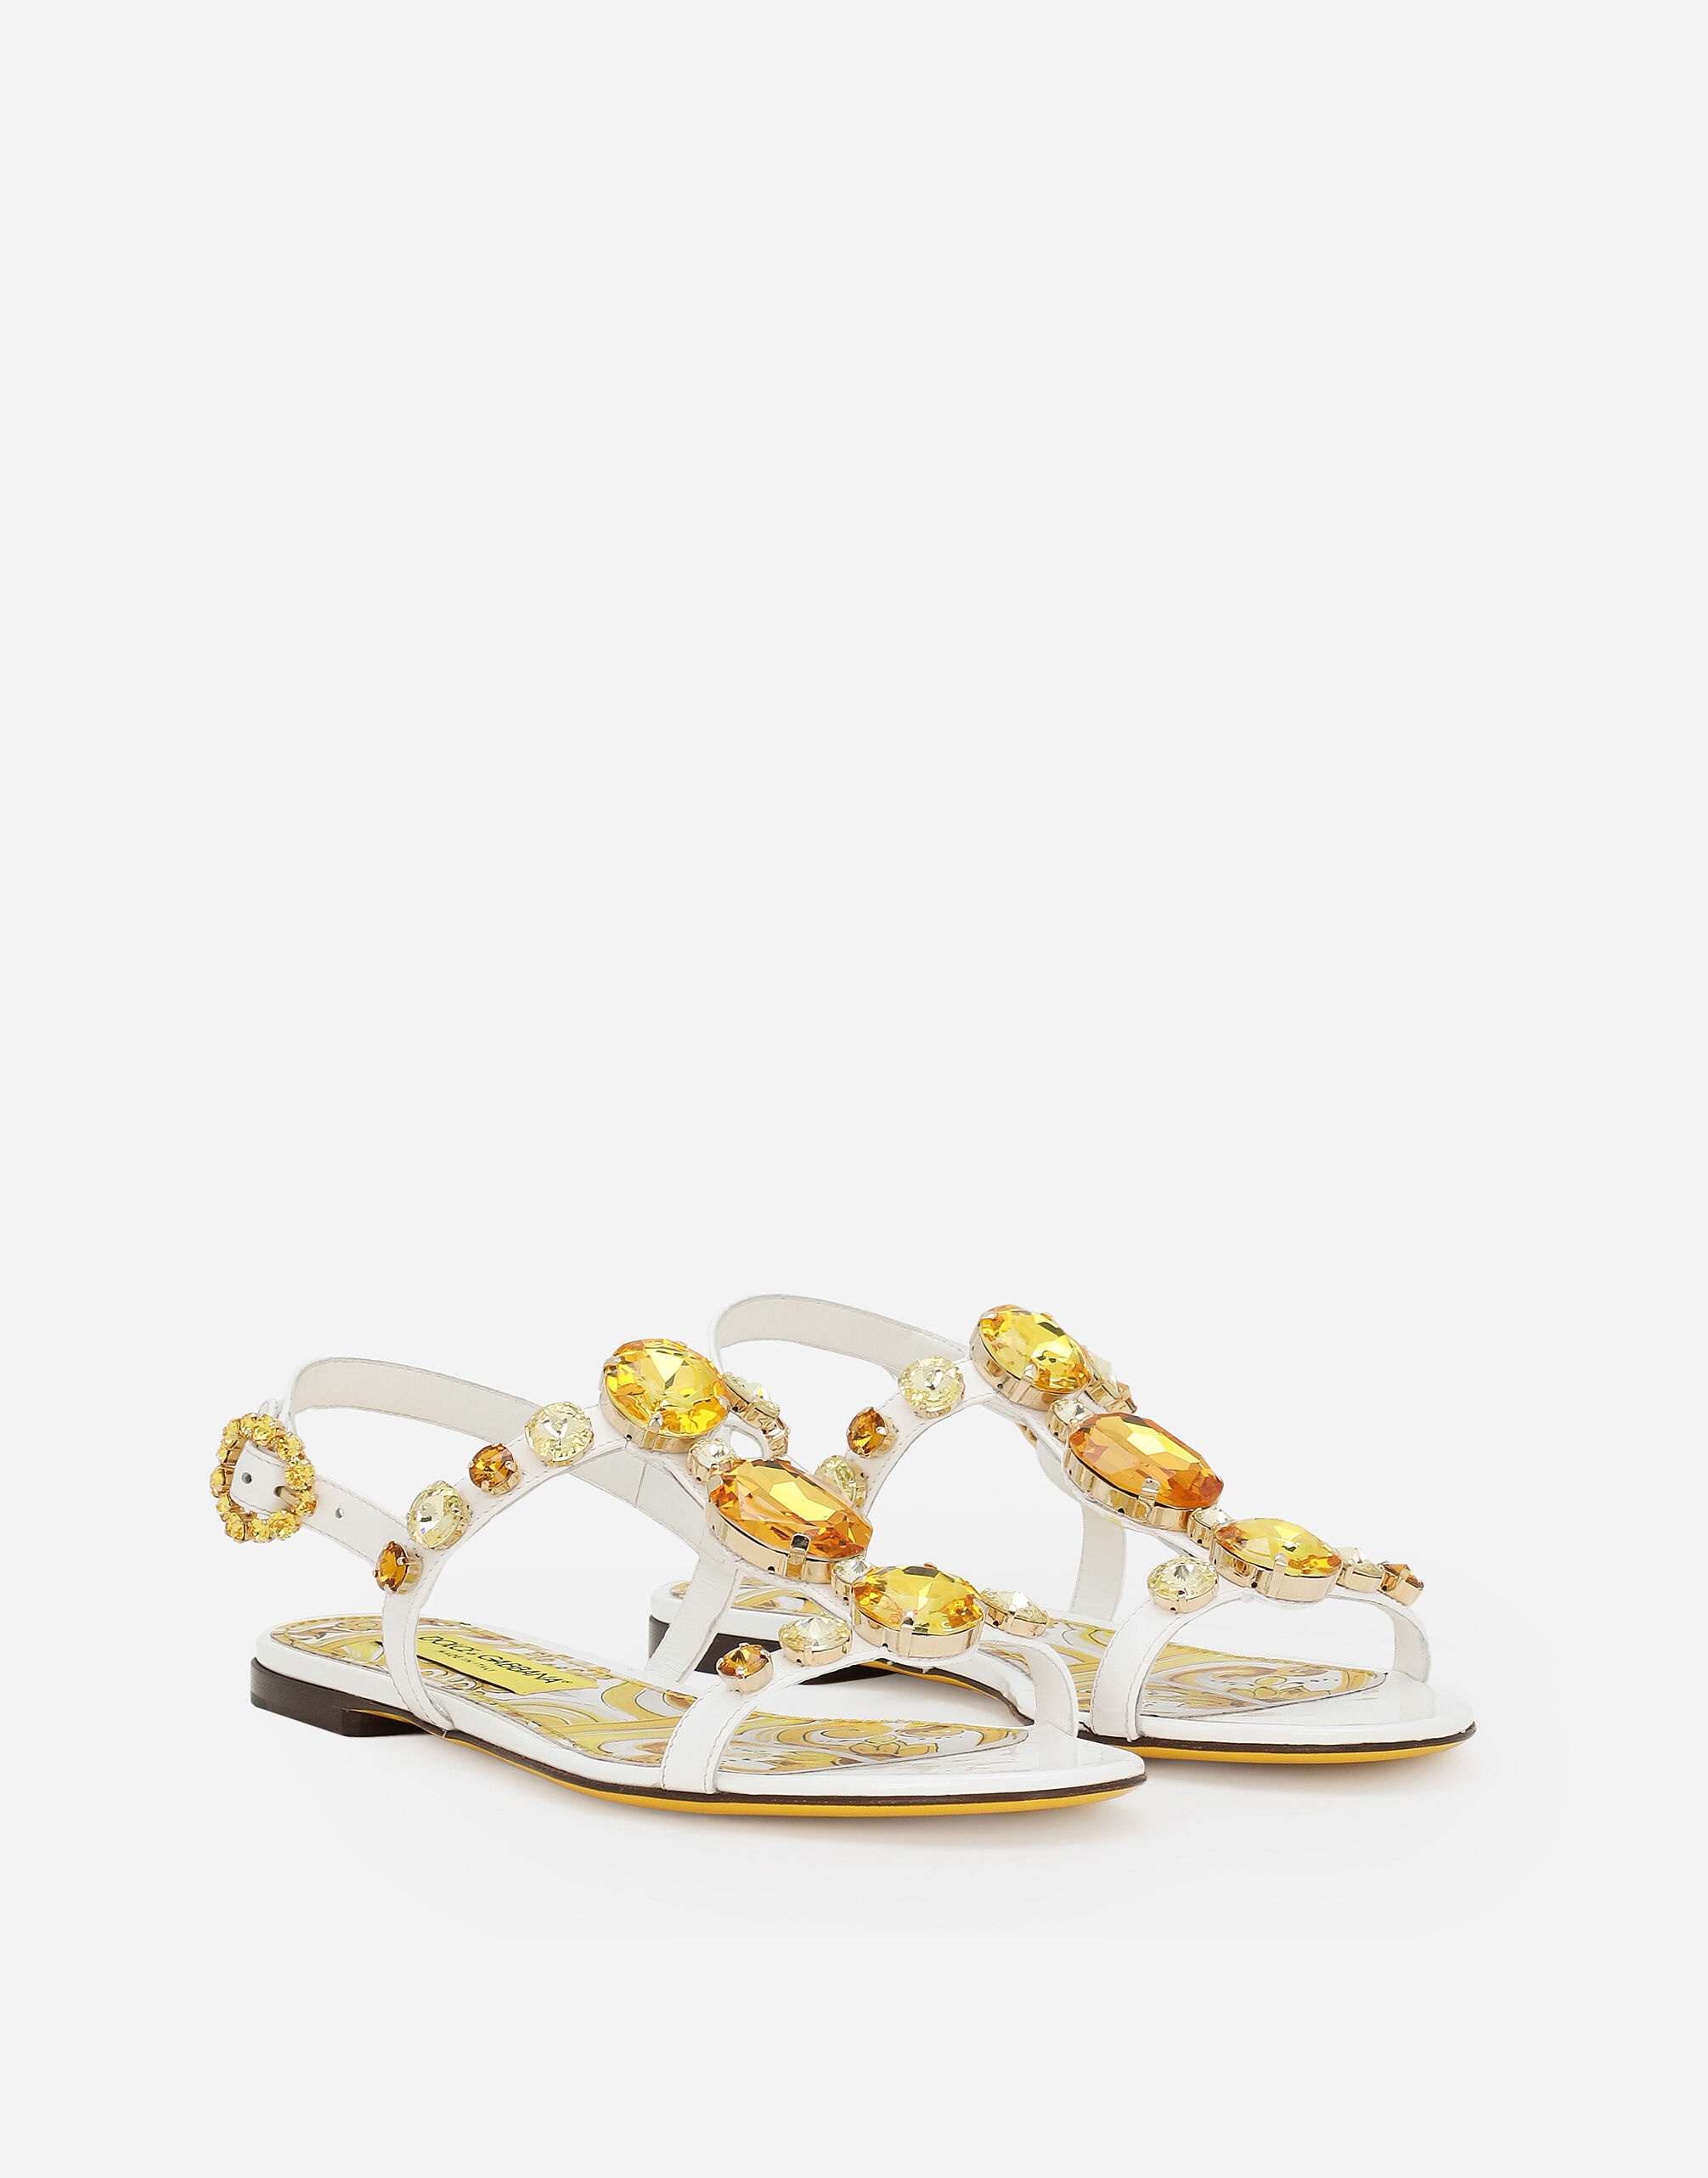 Patent leather sandals with stone embellishment - 2